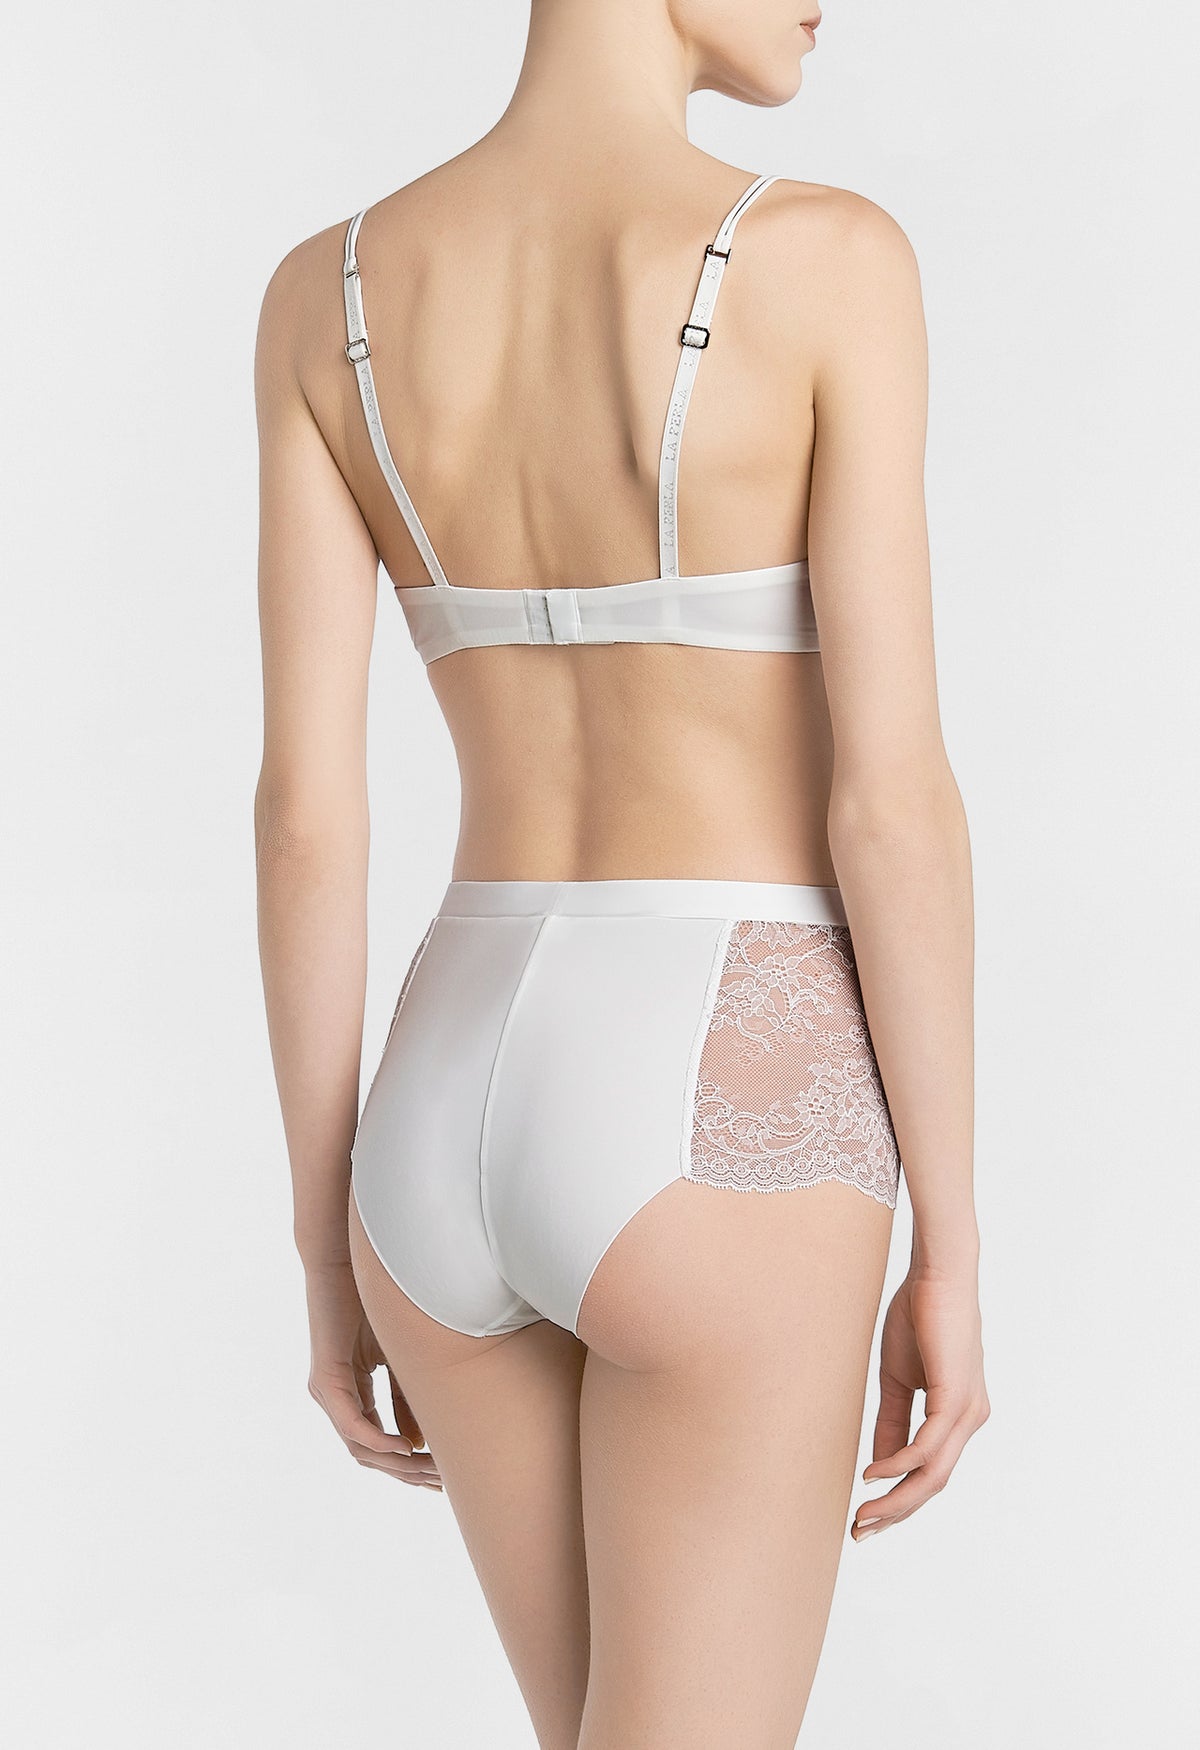 White Leavers lace high-waisted brief